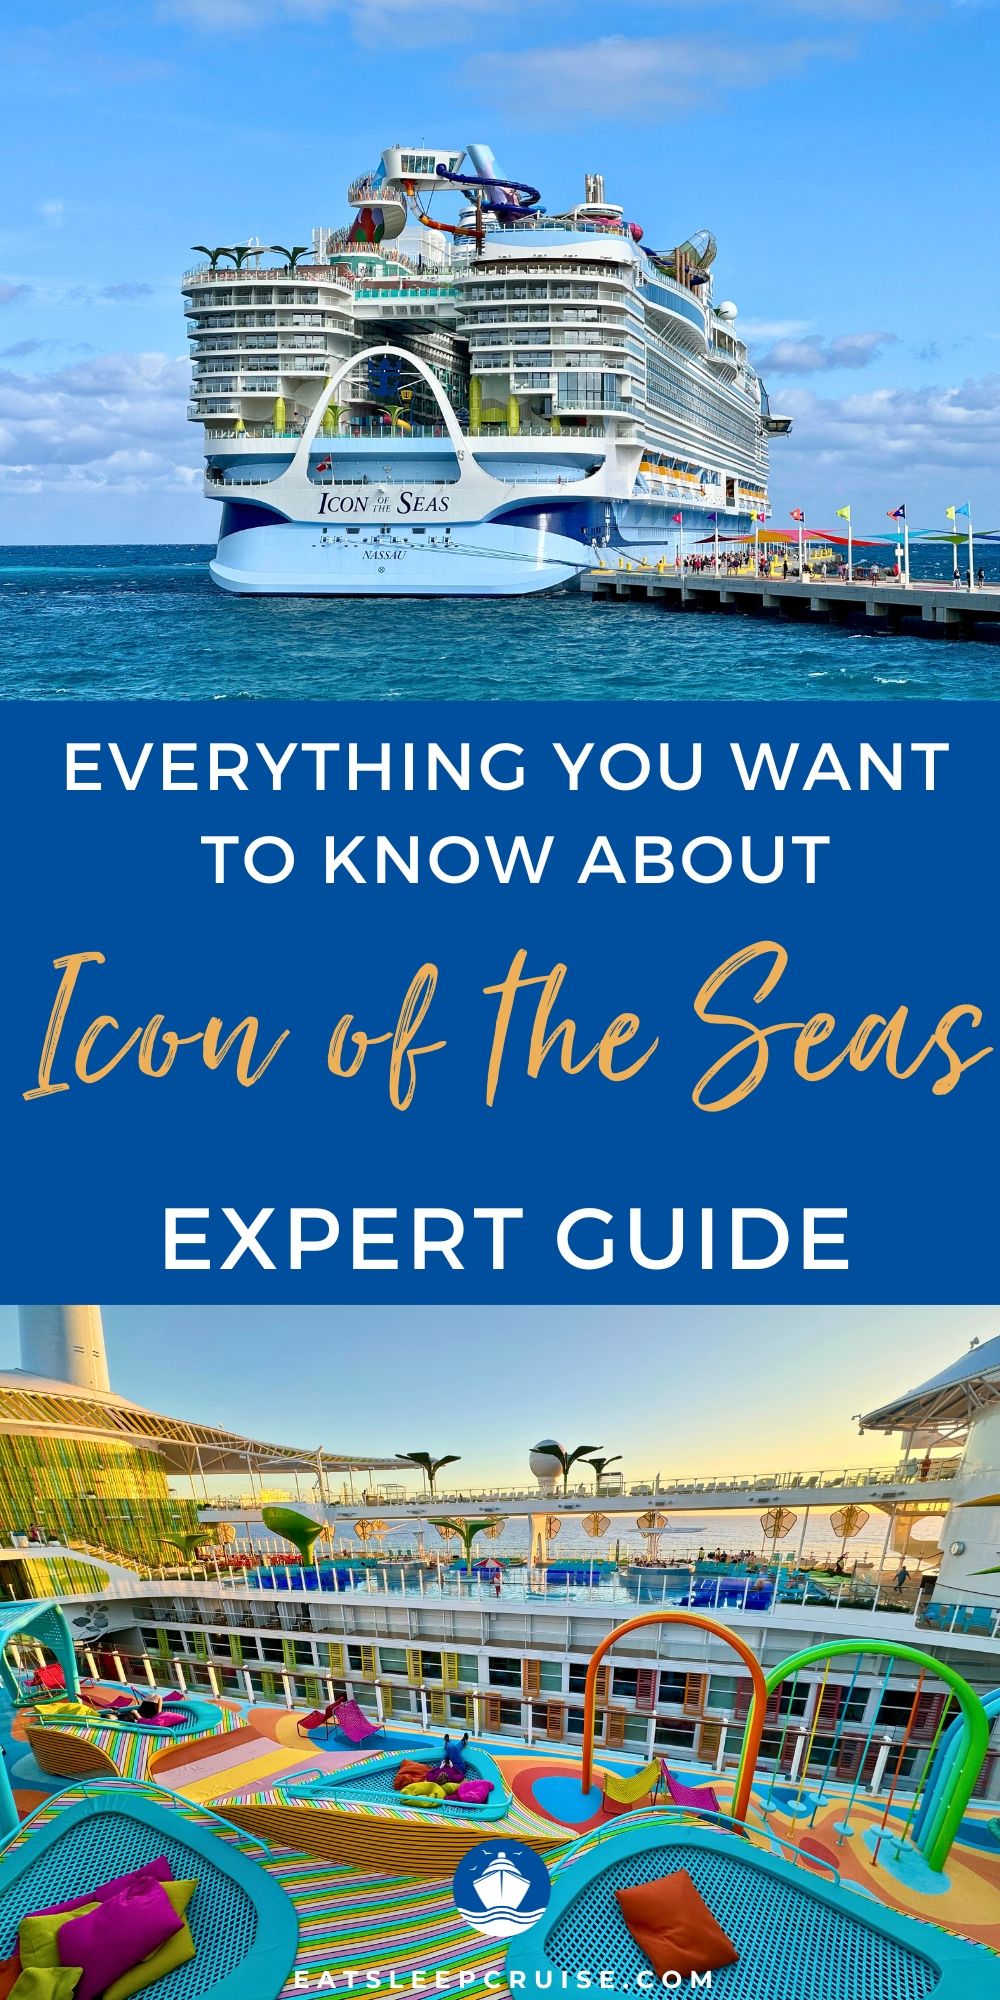 Read This Before Sailing on the New Icon of the Seas Cruise Ship